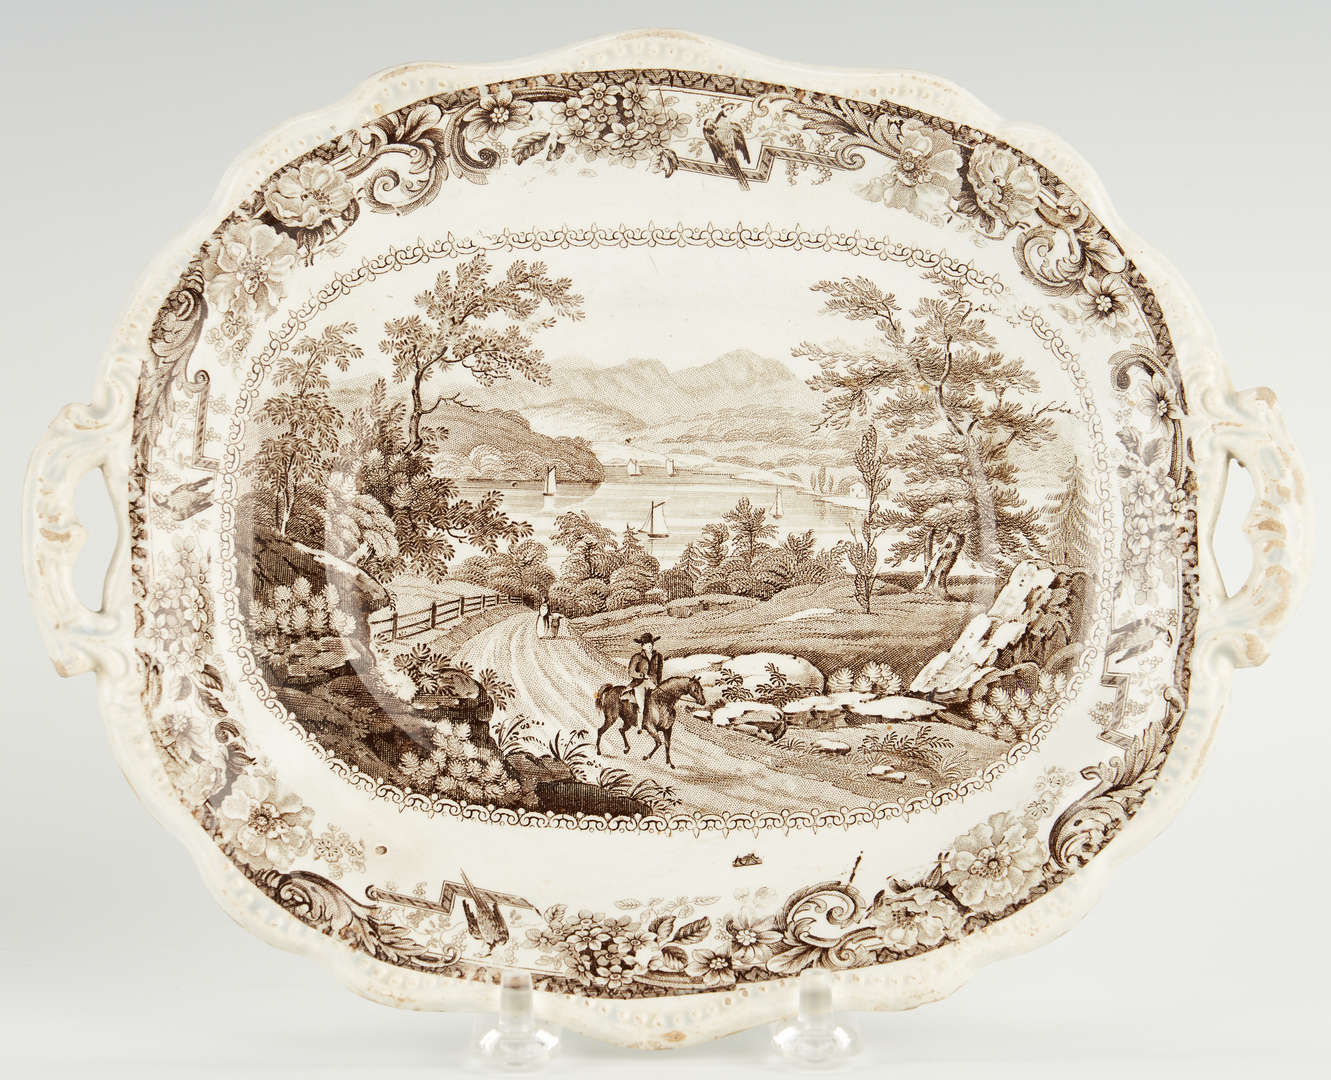 Lot 329: Two (2) Historical Staffordshire Platters, Hudson River